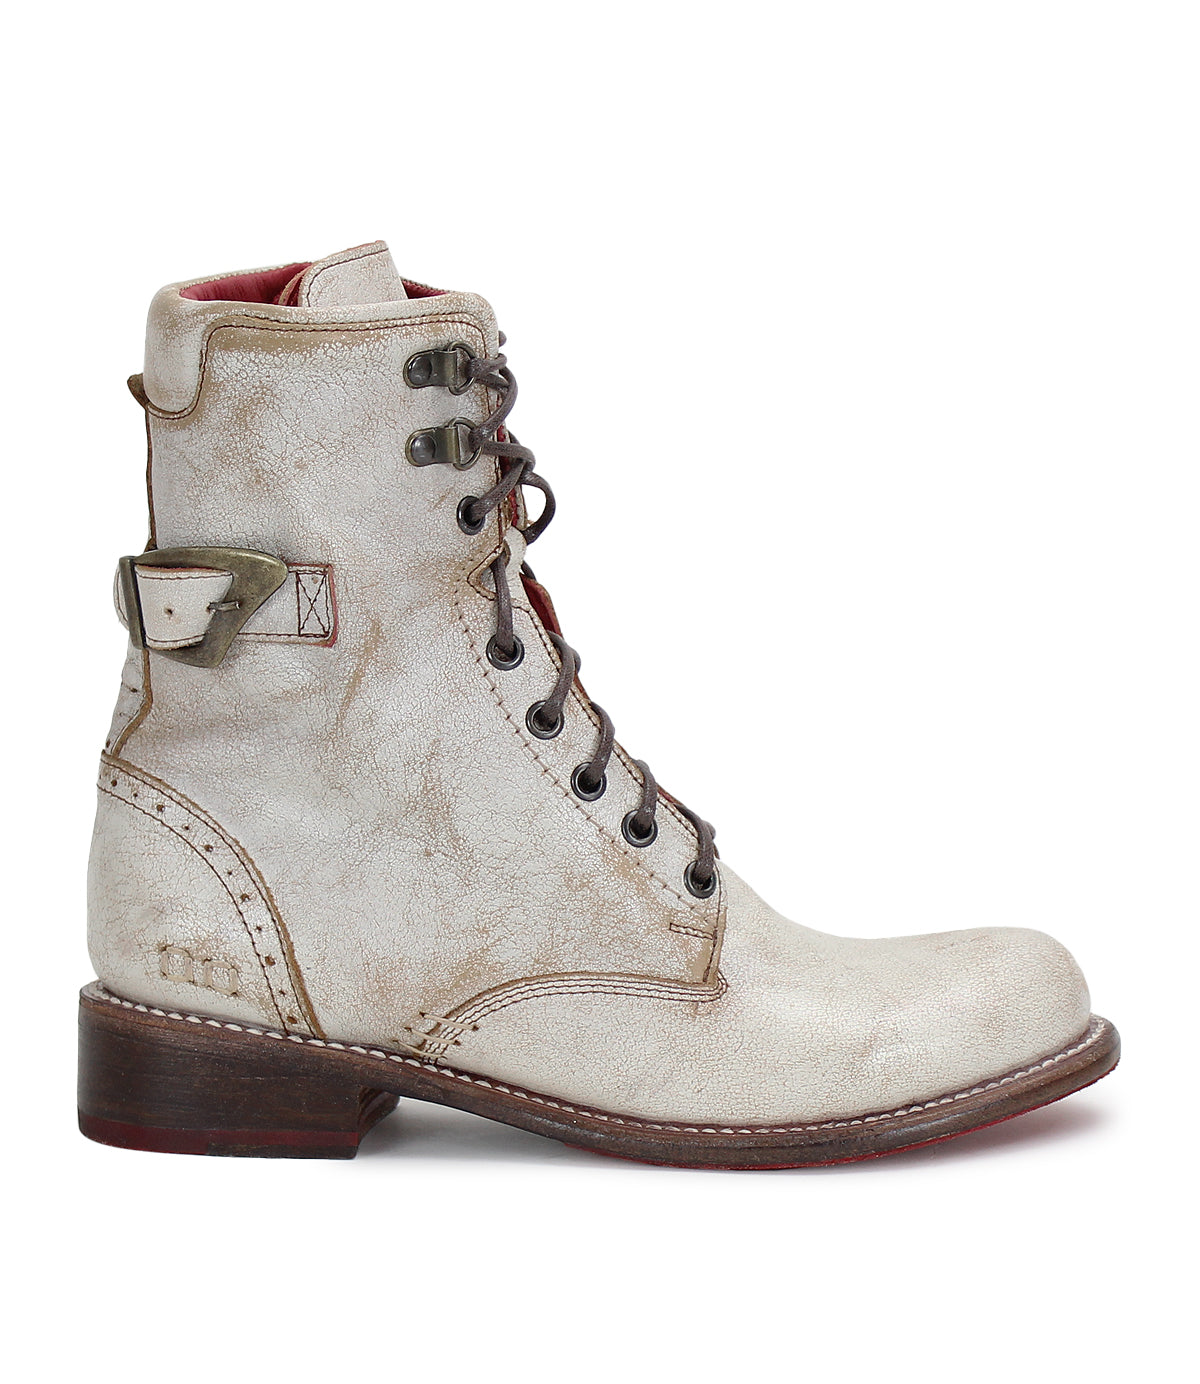 Bed Stu's Anne combat boot with a white finish.